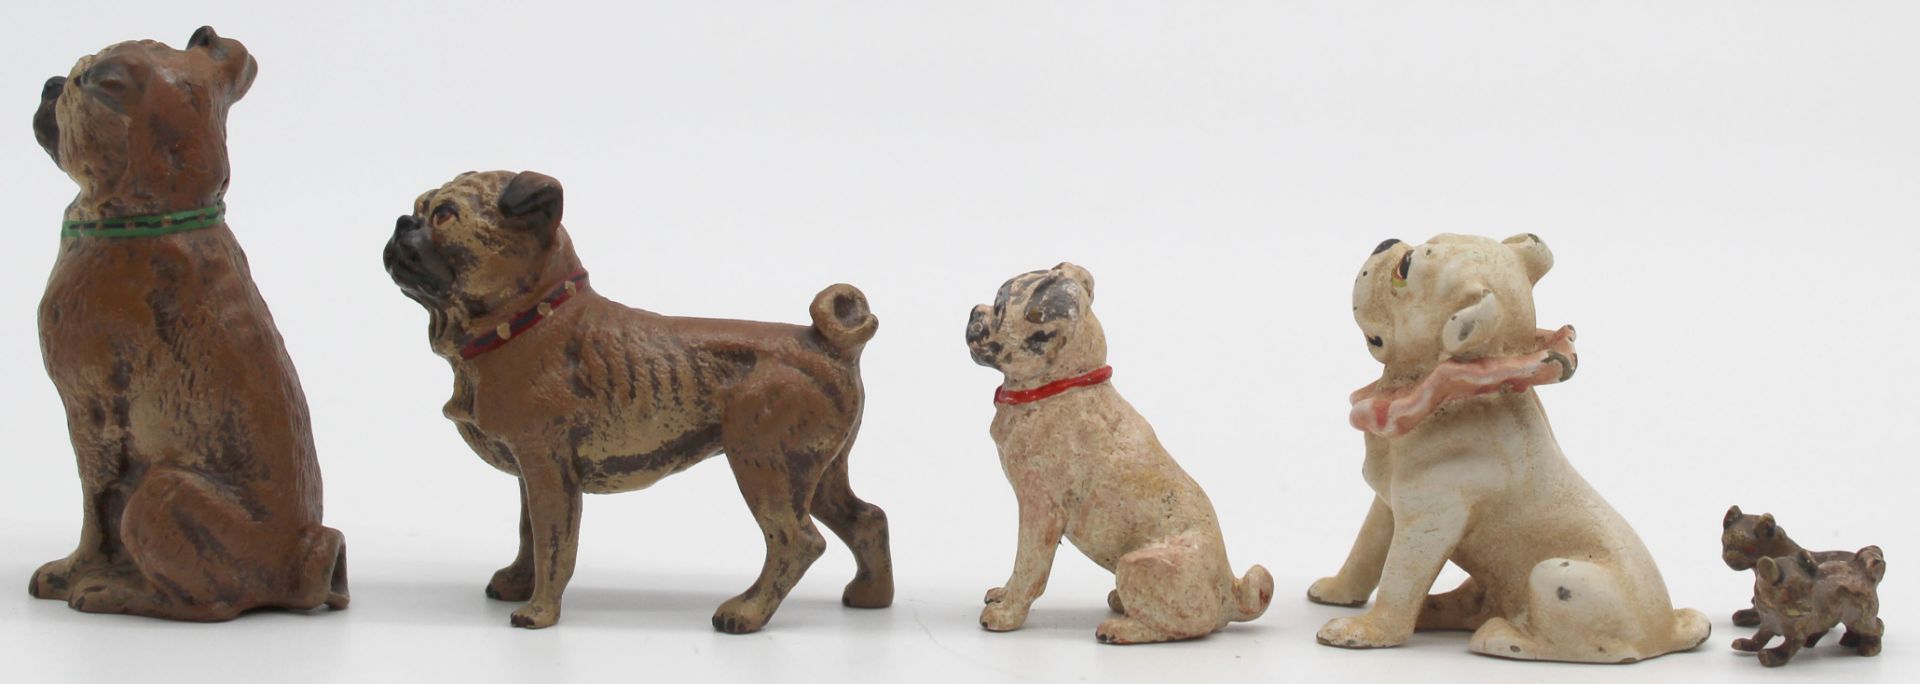 5 pugs. Cold painted bronze, Vienna? - Image 9 of 13